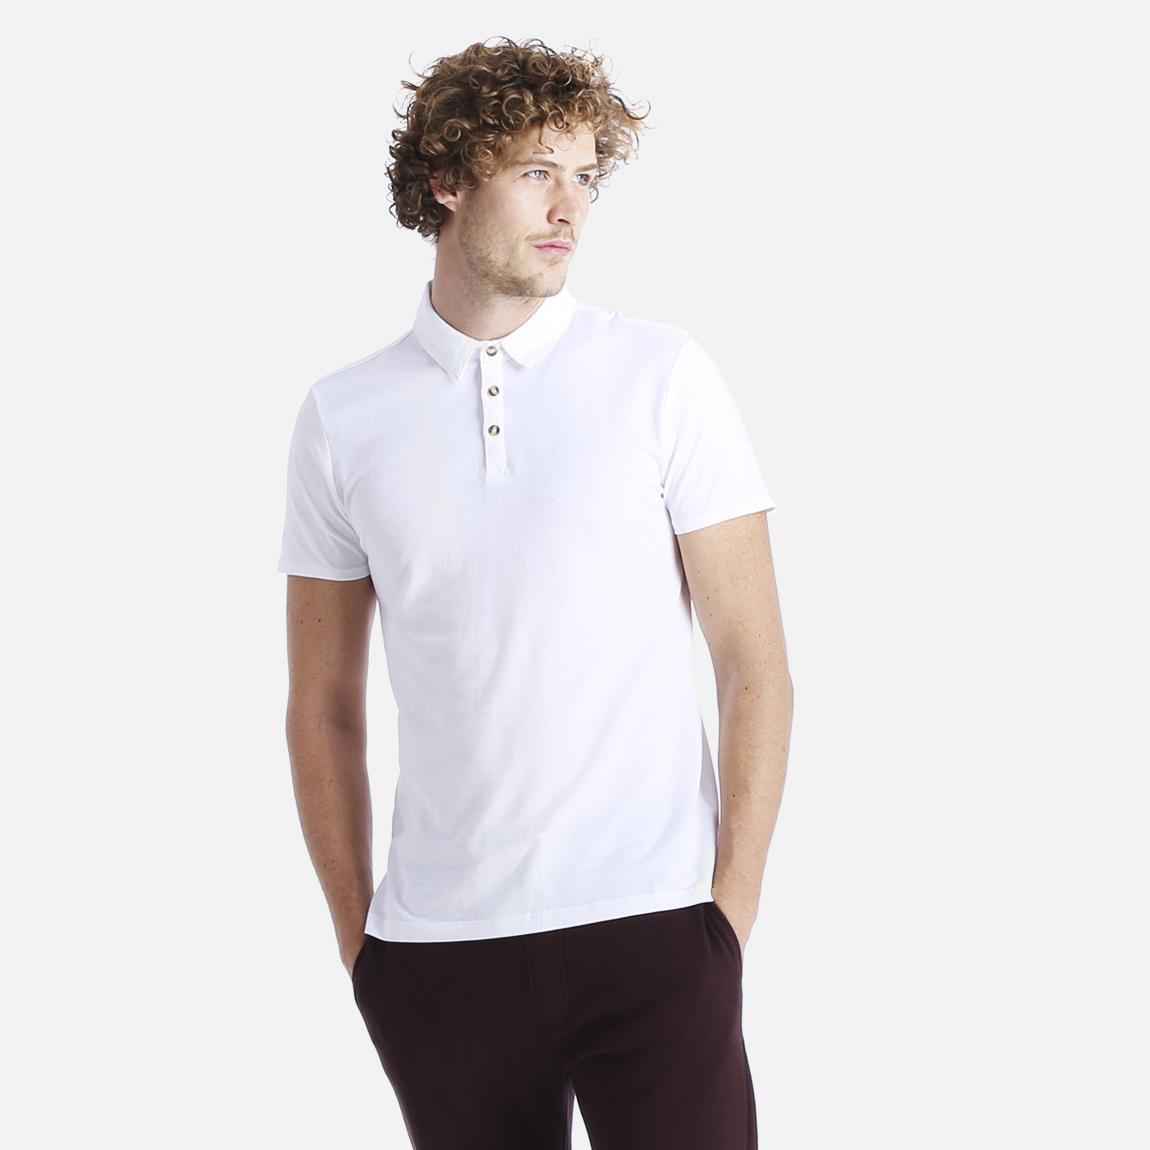 Cotton Polo - White New Look T-Shirts & Vests | Superbalist.com